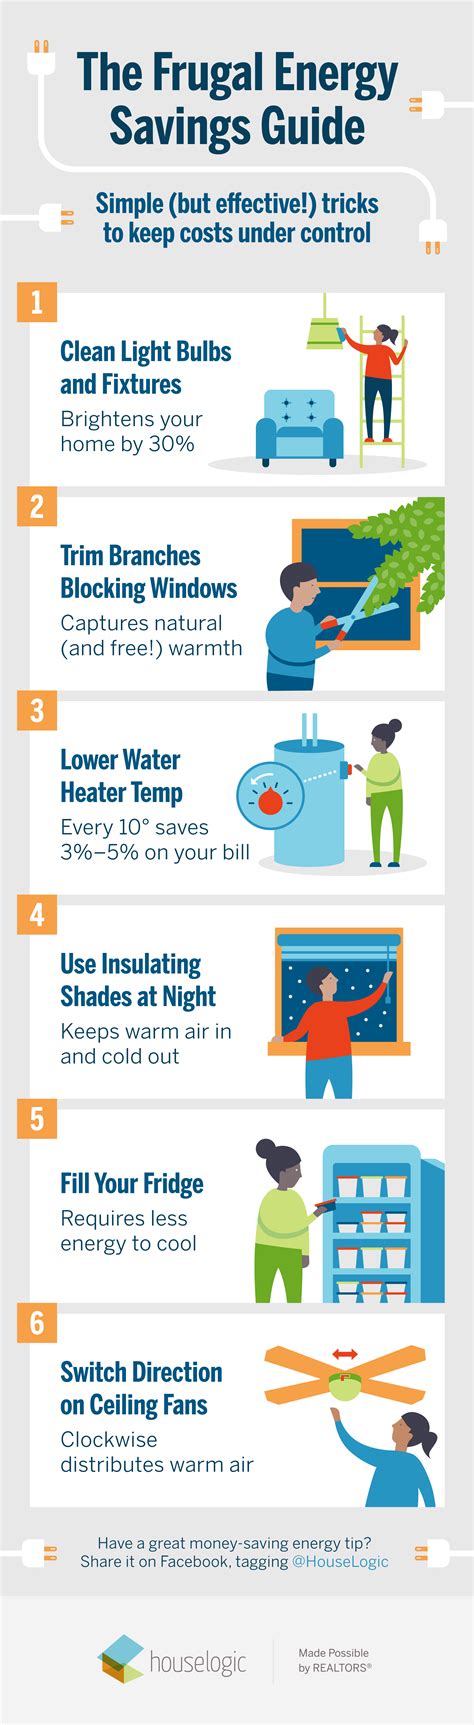 Even The Most Frugal Homeowner Will Find These 6 Cost Saving Energy Tips Super Helpful To Keep